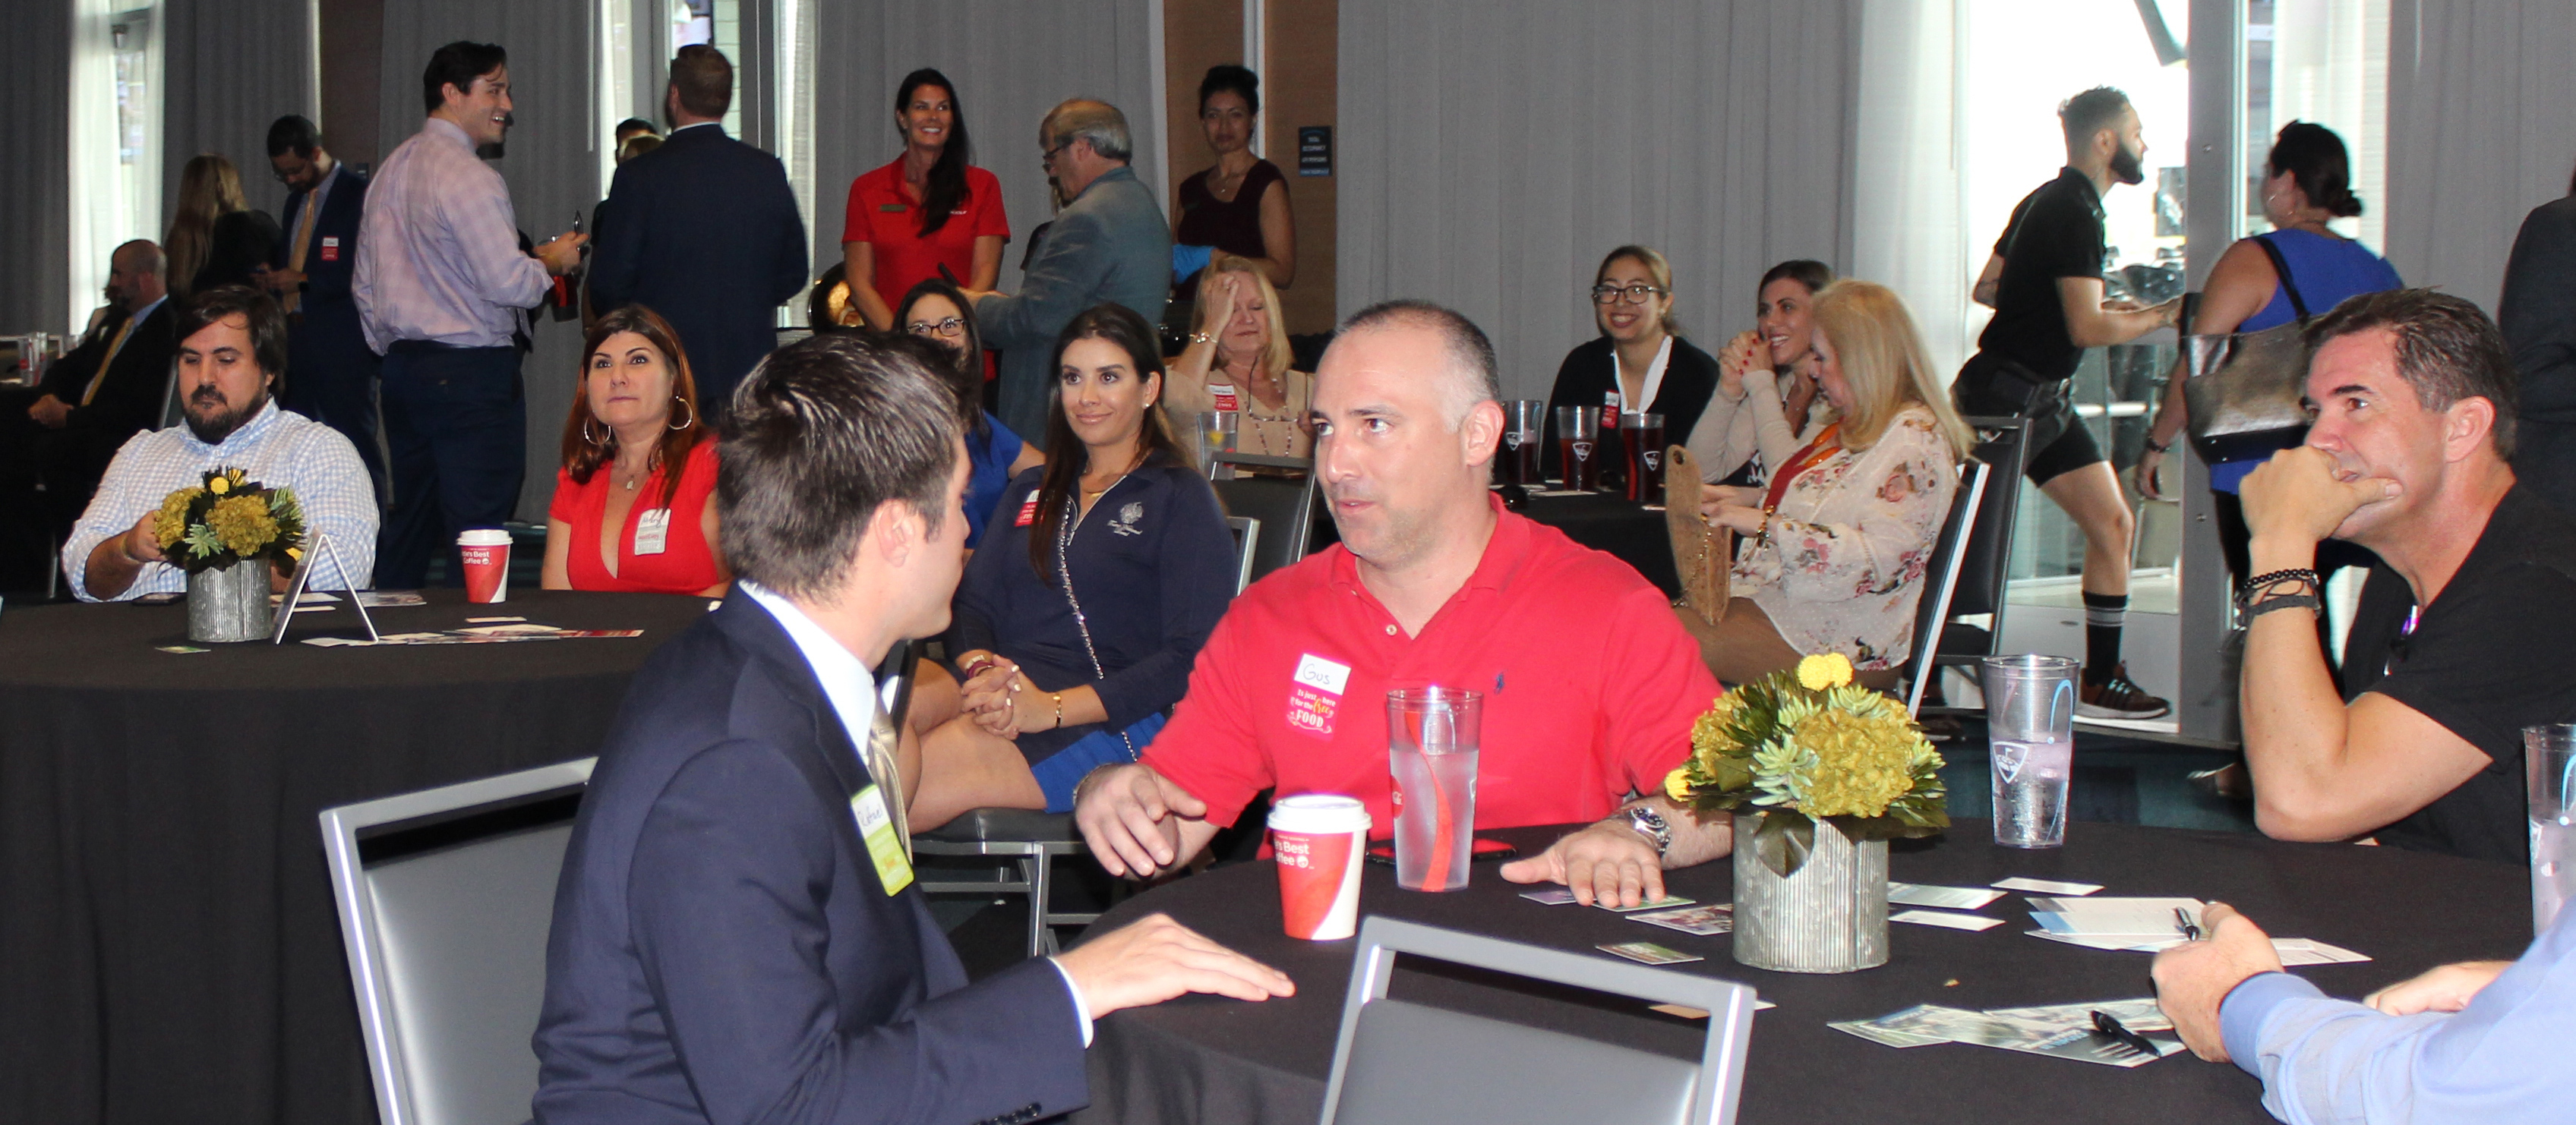 Doral Chamber of Commerce introduces members networking and talking at Topgolf Doral Networking Luncheon Event.